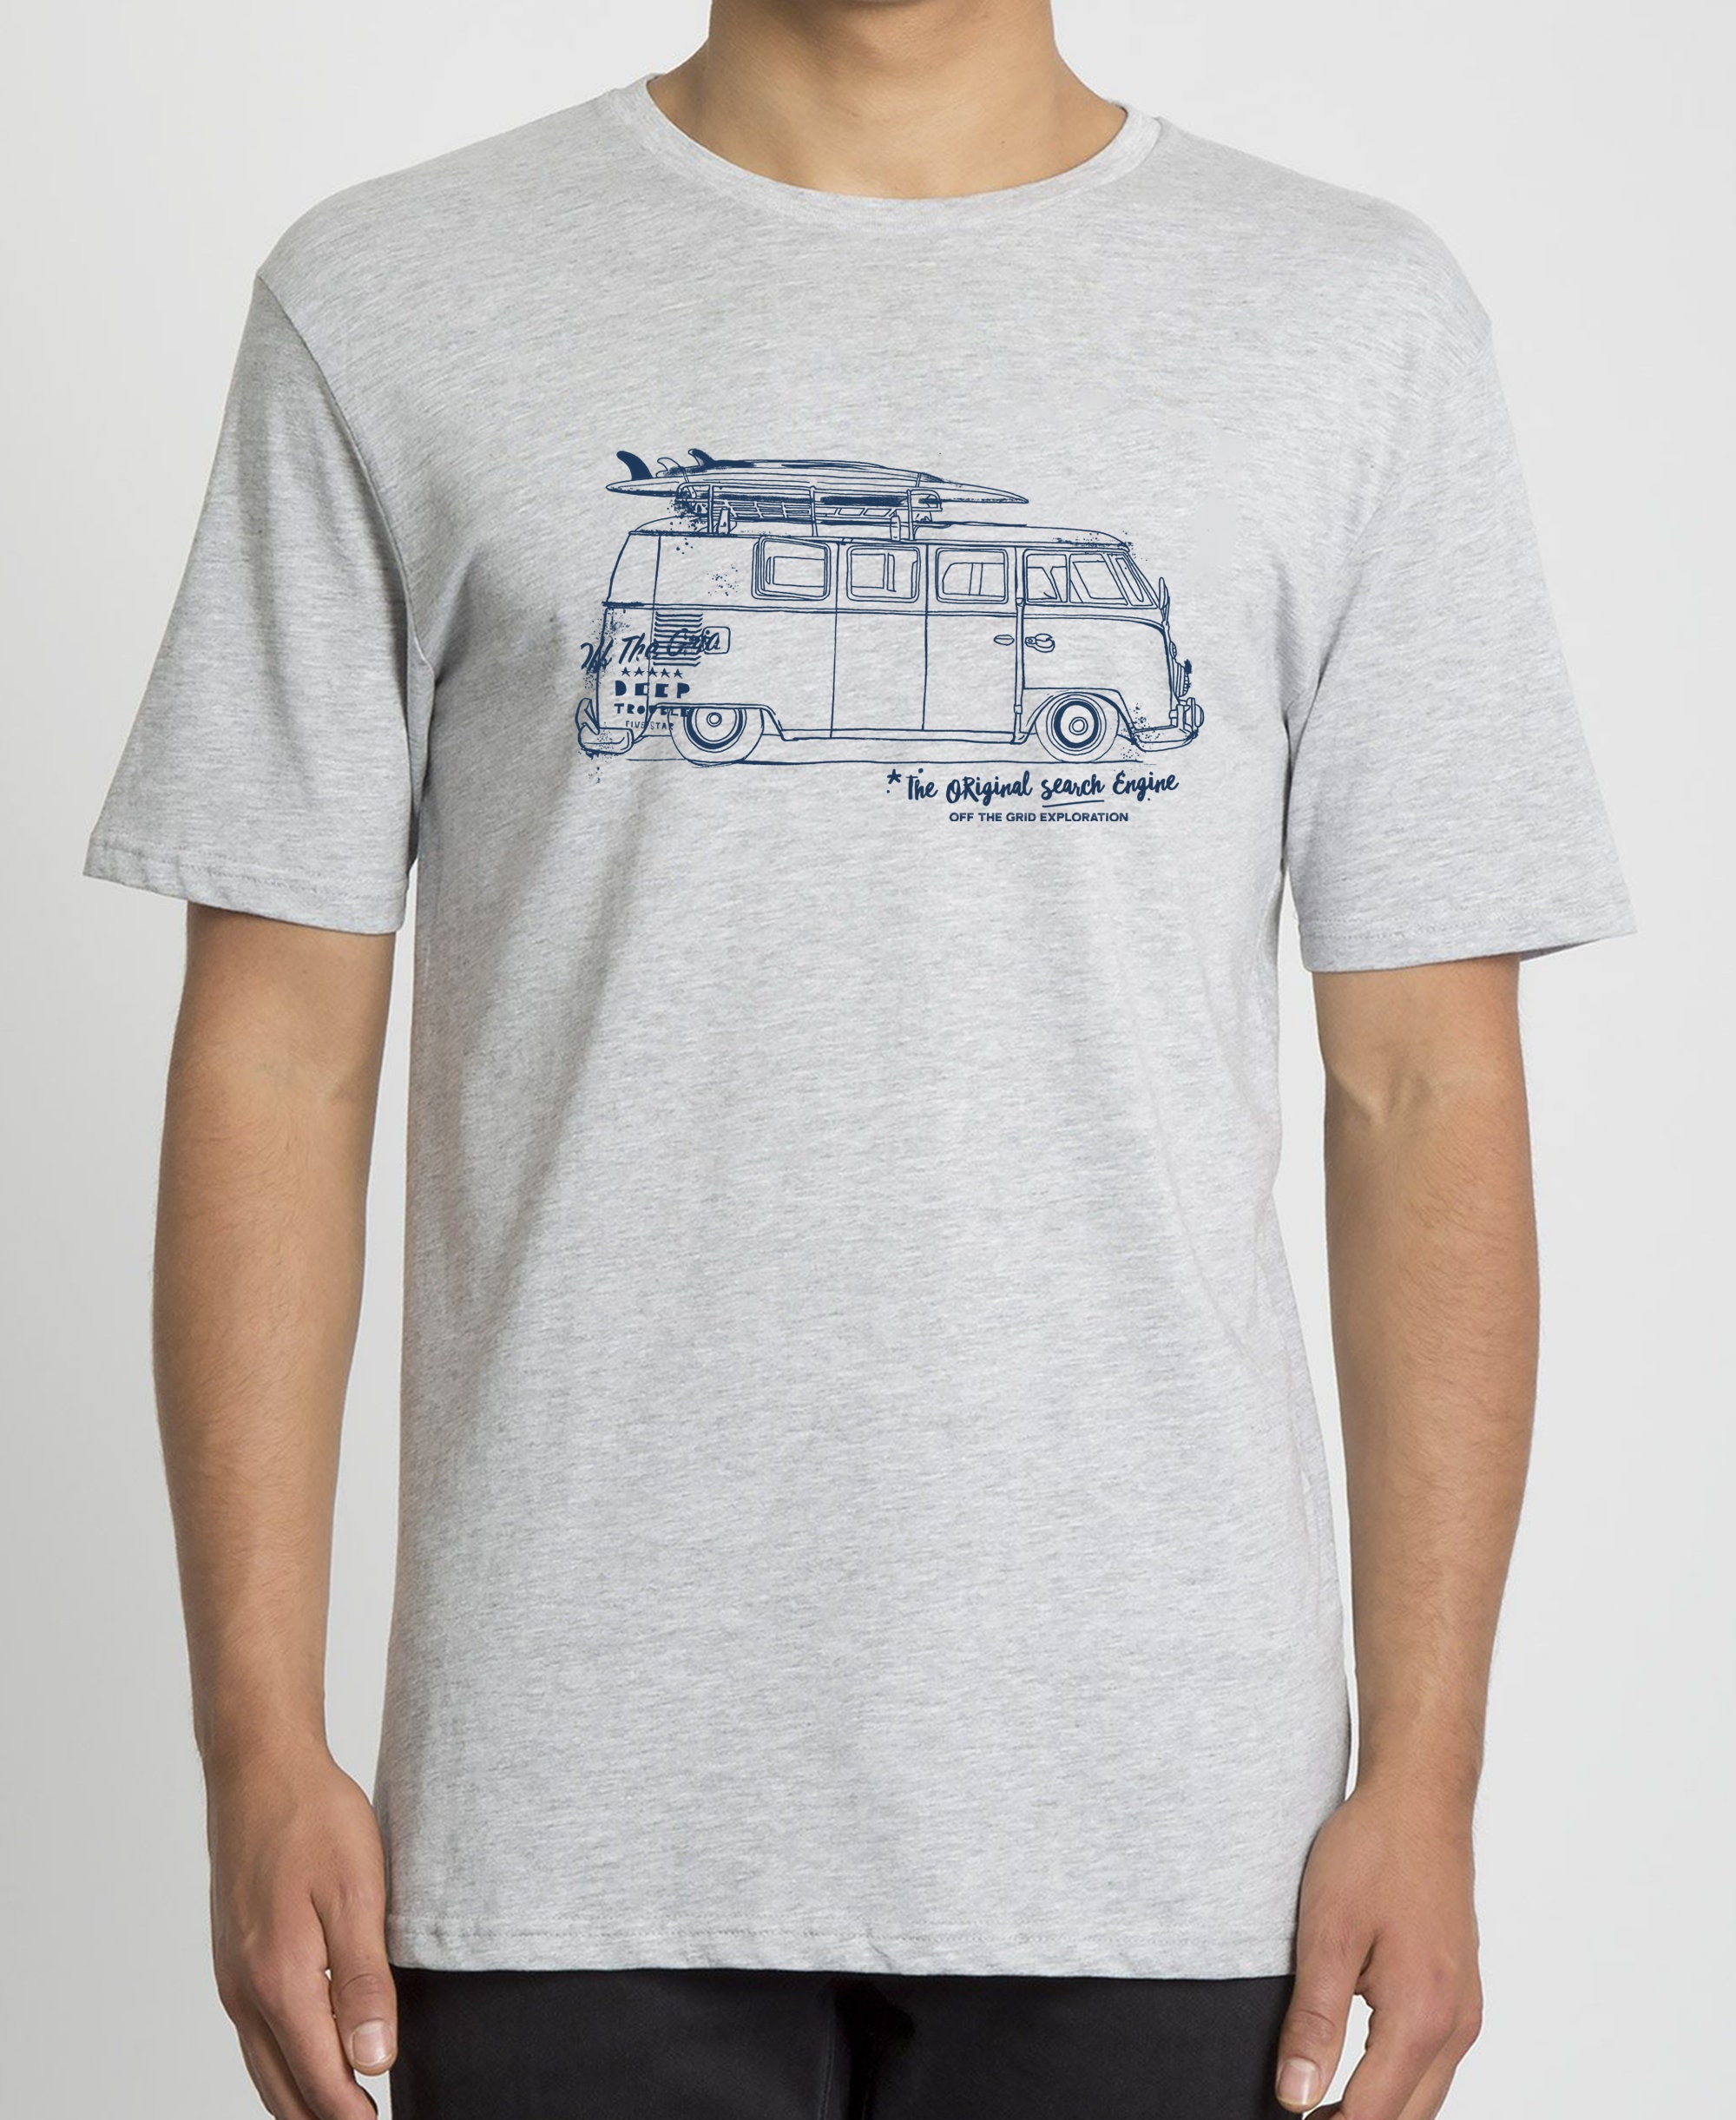 The Original Search Engine T-Shirt Camper Van Tee or Camping | Etsy